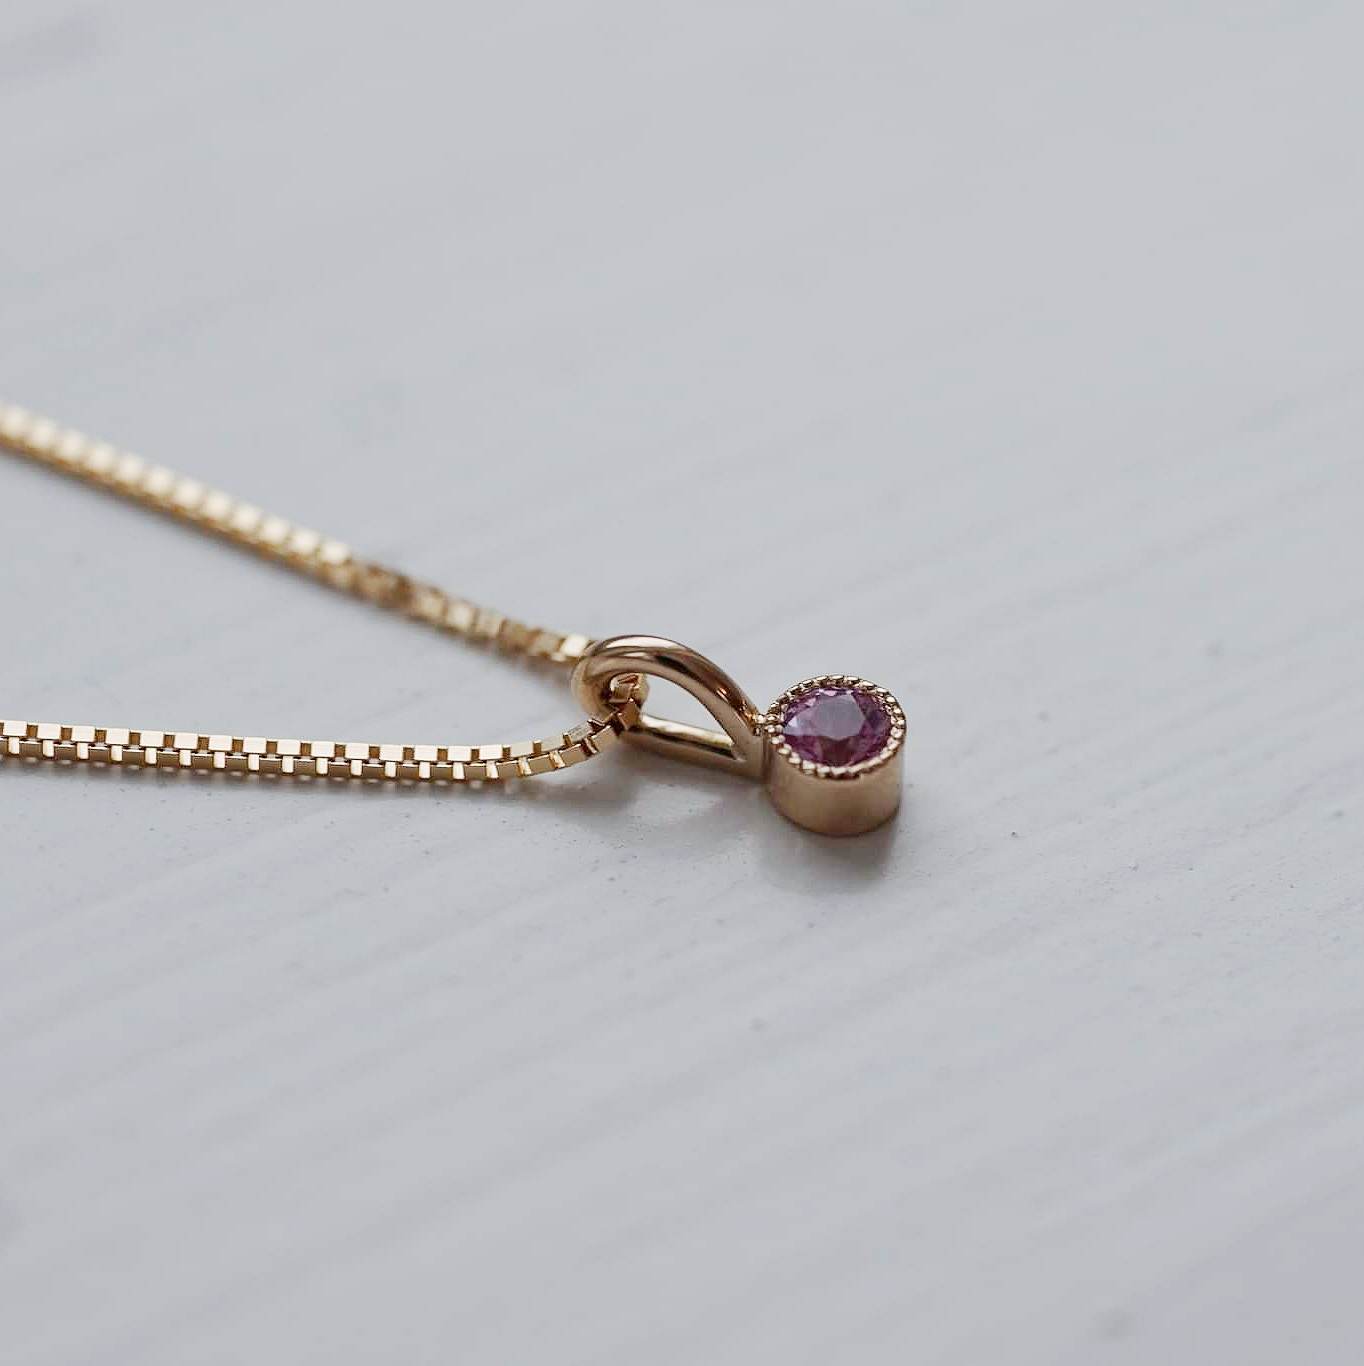 "Twinkle" pendant in gold with a light pink sapphire